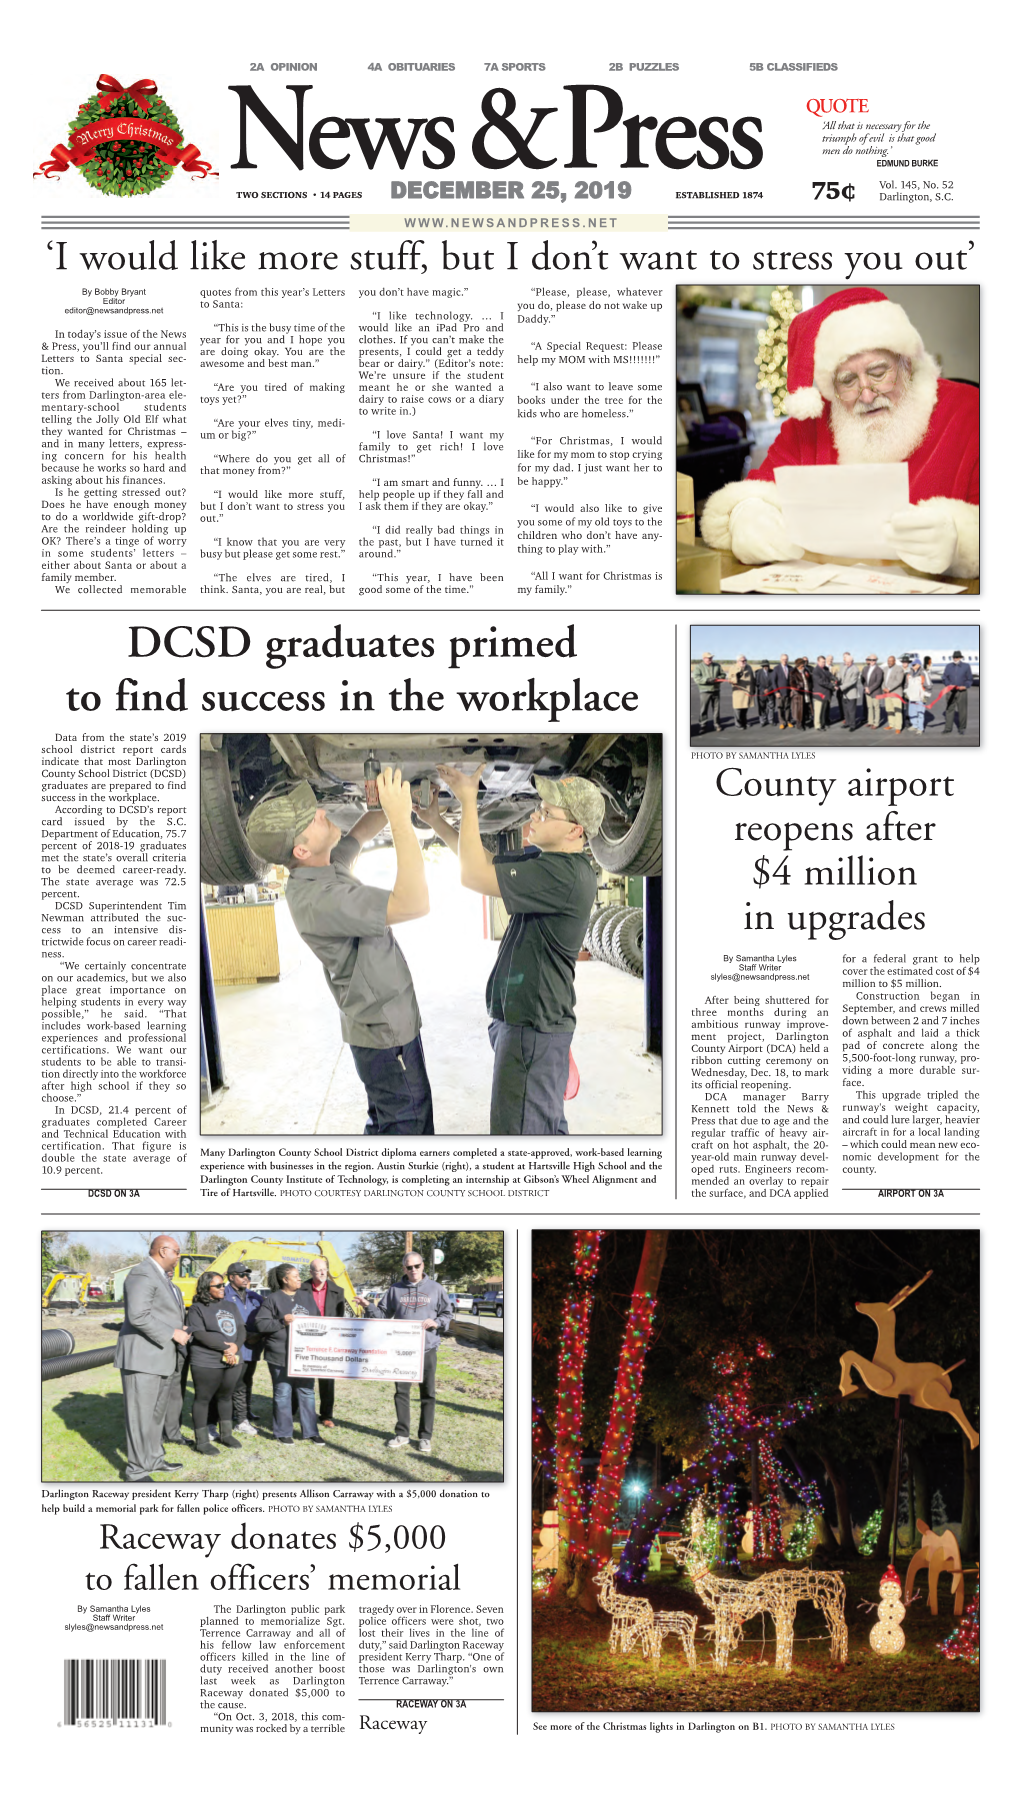 DCSD Graduates Primed to Find Success in the Workplace